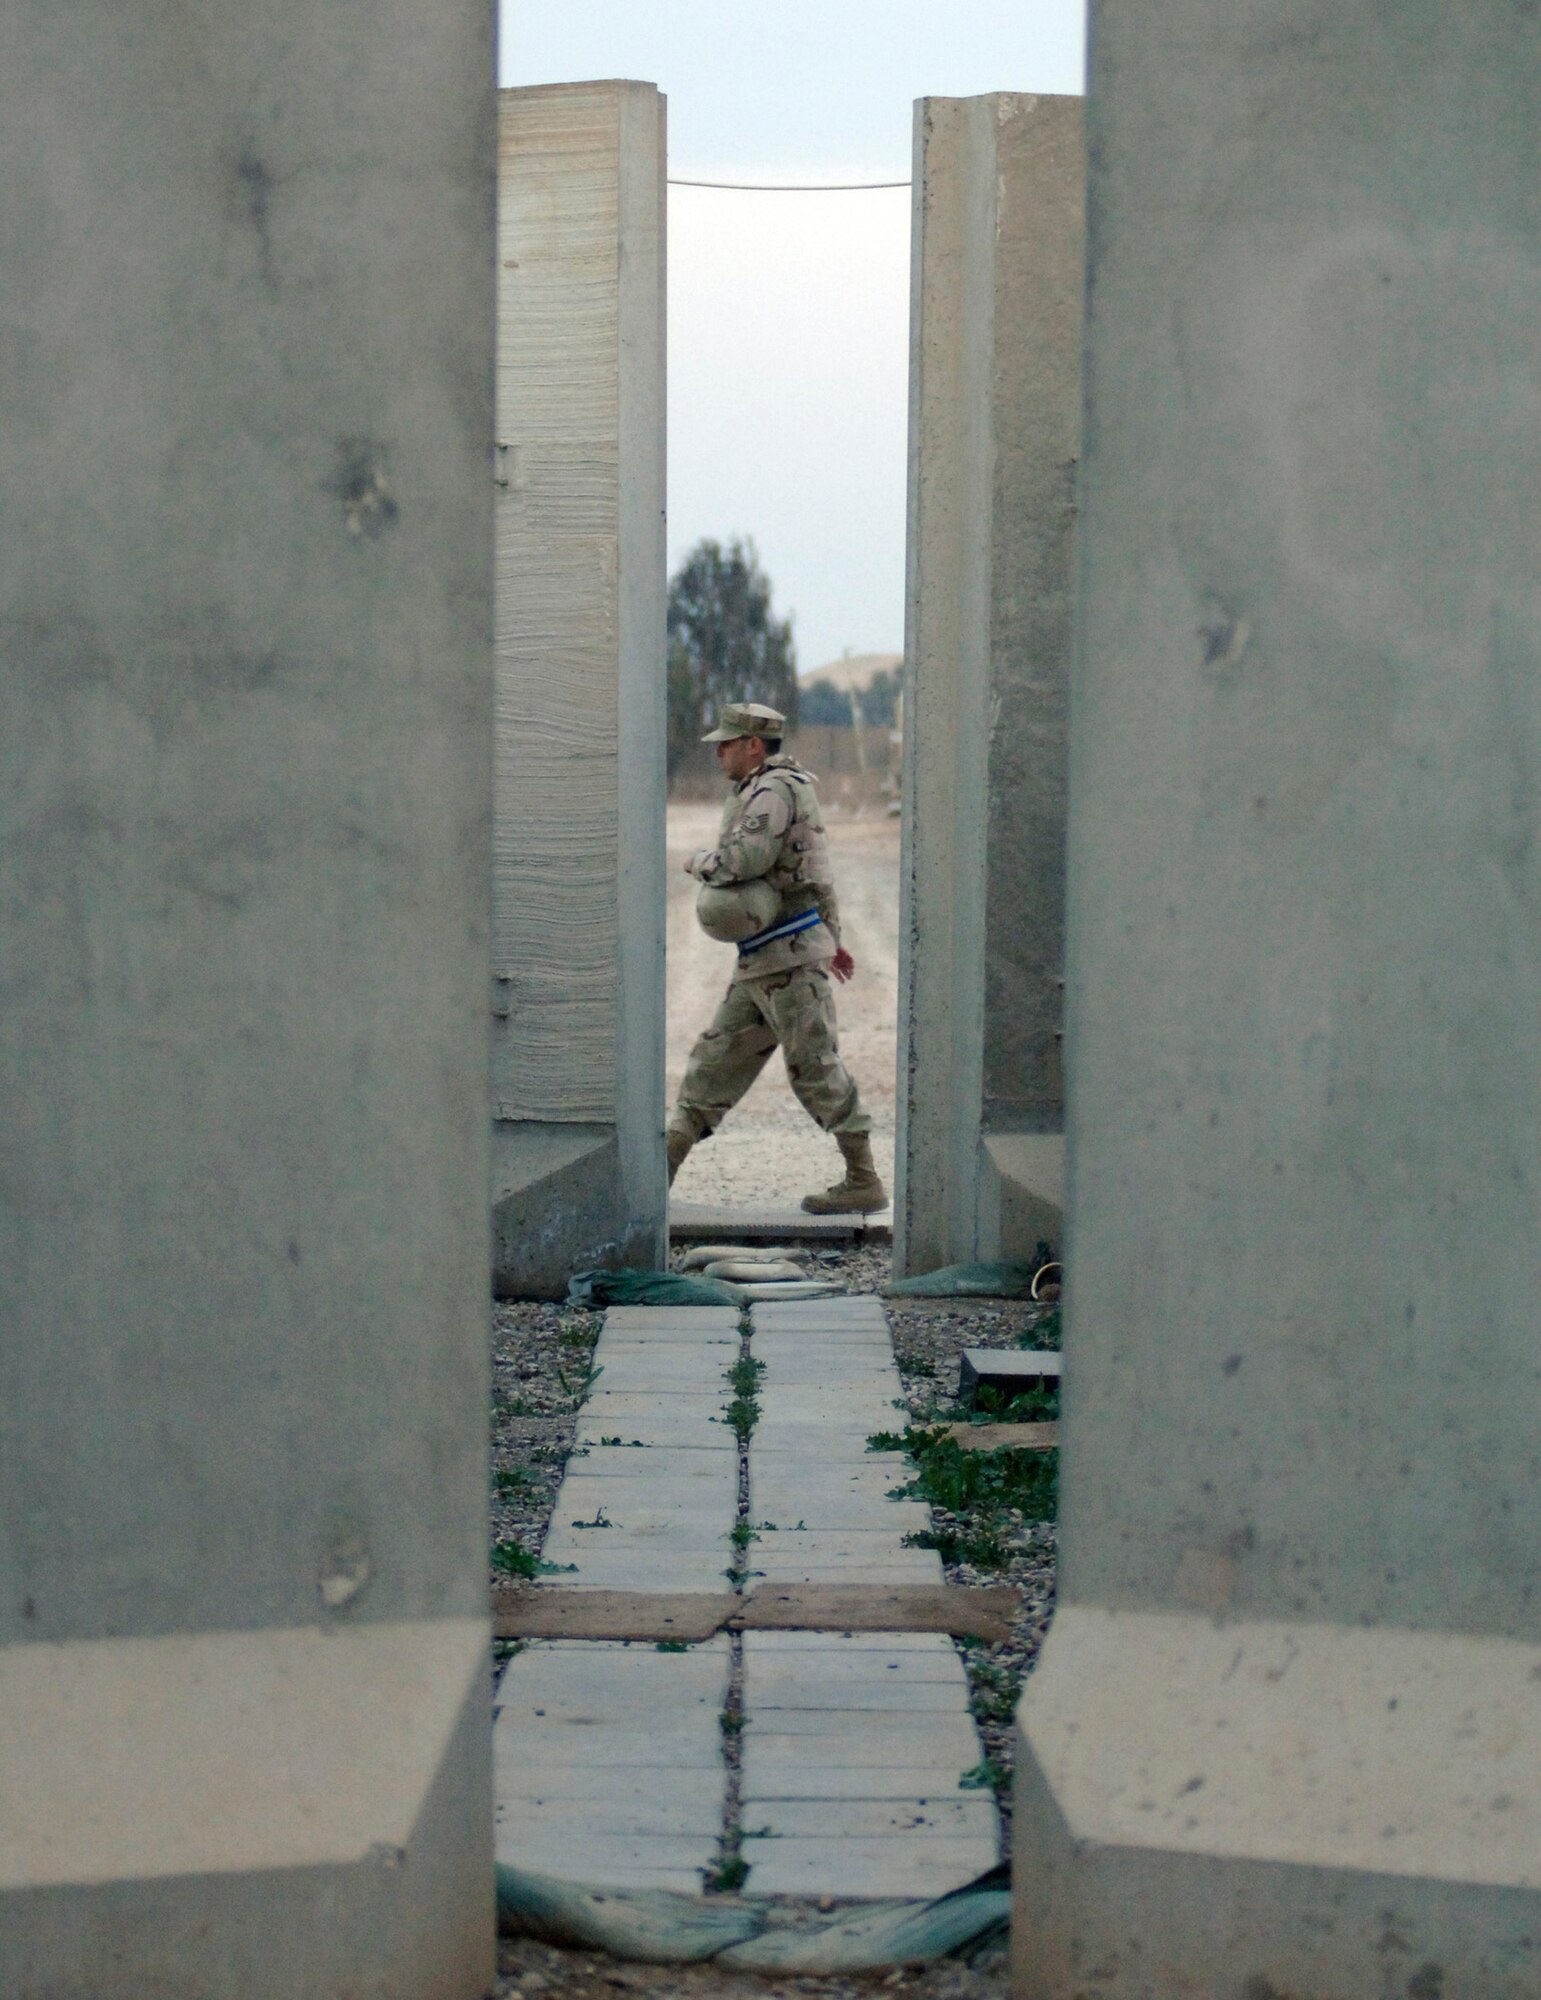 An Airman walks between a row of large T-barriers Feb. 21 at Balad Air Base, Iraq.  Most Airmen assigned to the base live in a compound surrounded by towering T-barriers. They act as a line of defense against stray bullets and blast protection from mortar attacks. The weight of the T-barriers varies from four to 17 tons. The T-barriers' purpose is to protect all base facilities.  This intricate network of pathways serves as a shield for more than 3,300 Airmen. (U.S. Air Force photo/Tech. Sgt. Cecilio M. Ricardo Jr.)